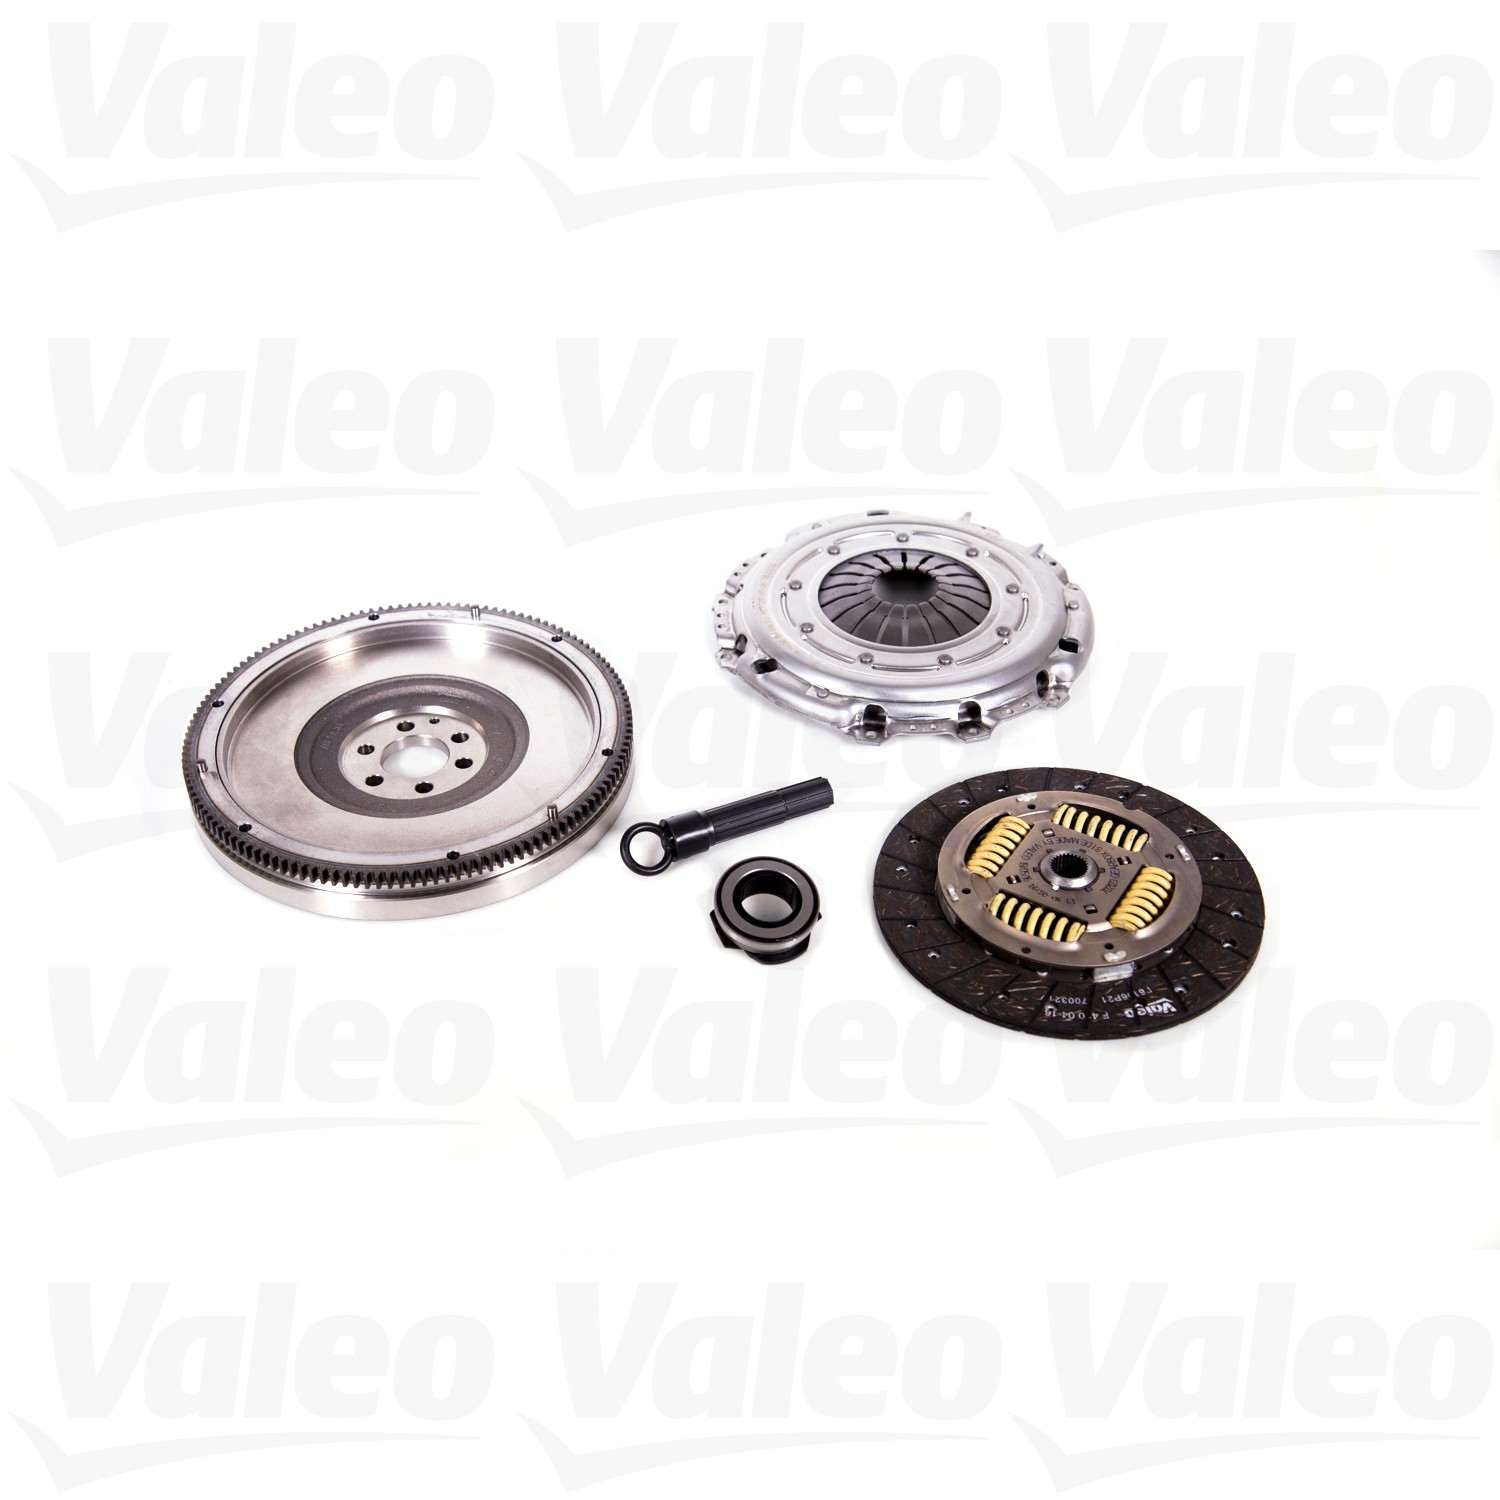 Front View of Clutch Flywheel Conversion Kit VALEO 52285616